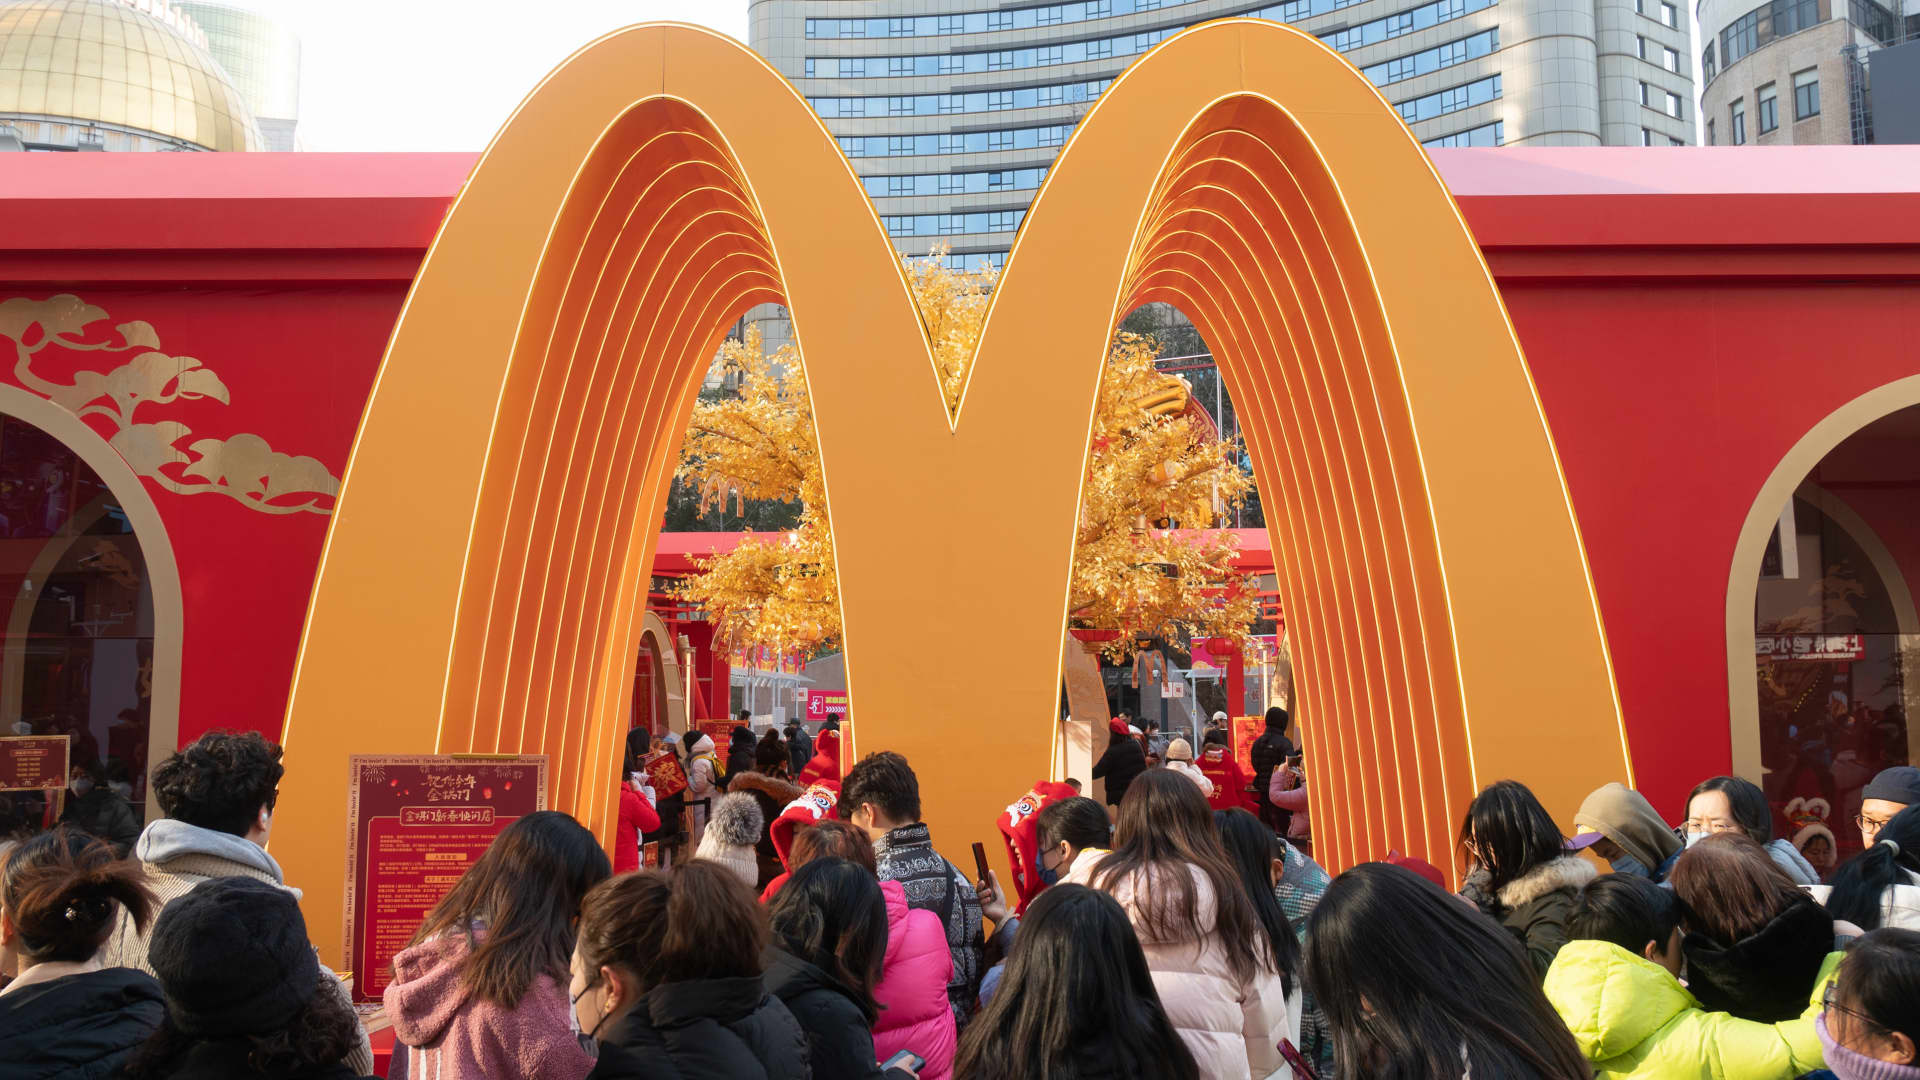 McDonald’s is about to report earnings. Here’s what to expect